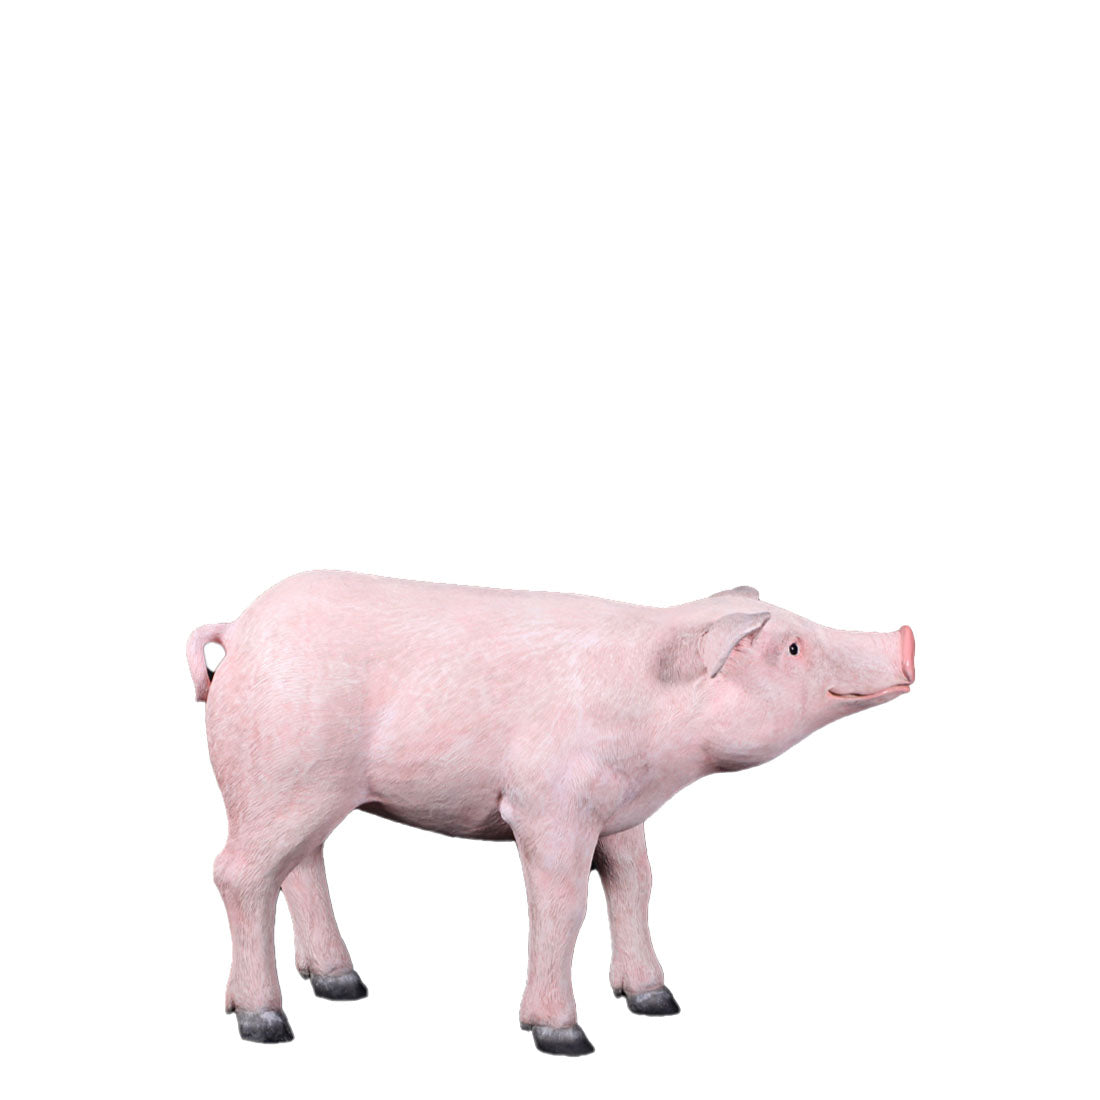 realistic life size animal pigs silicone